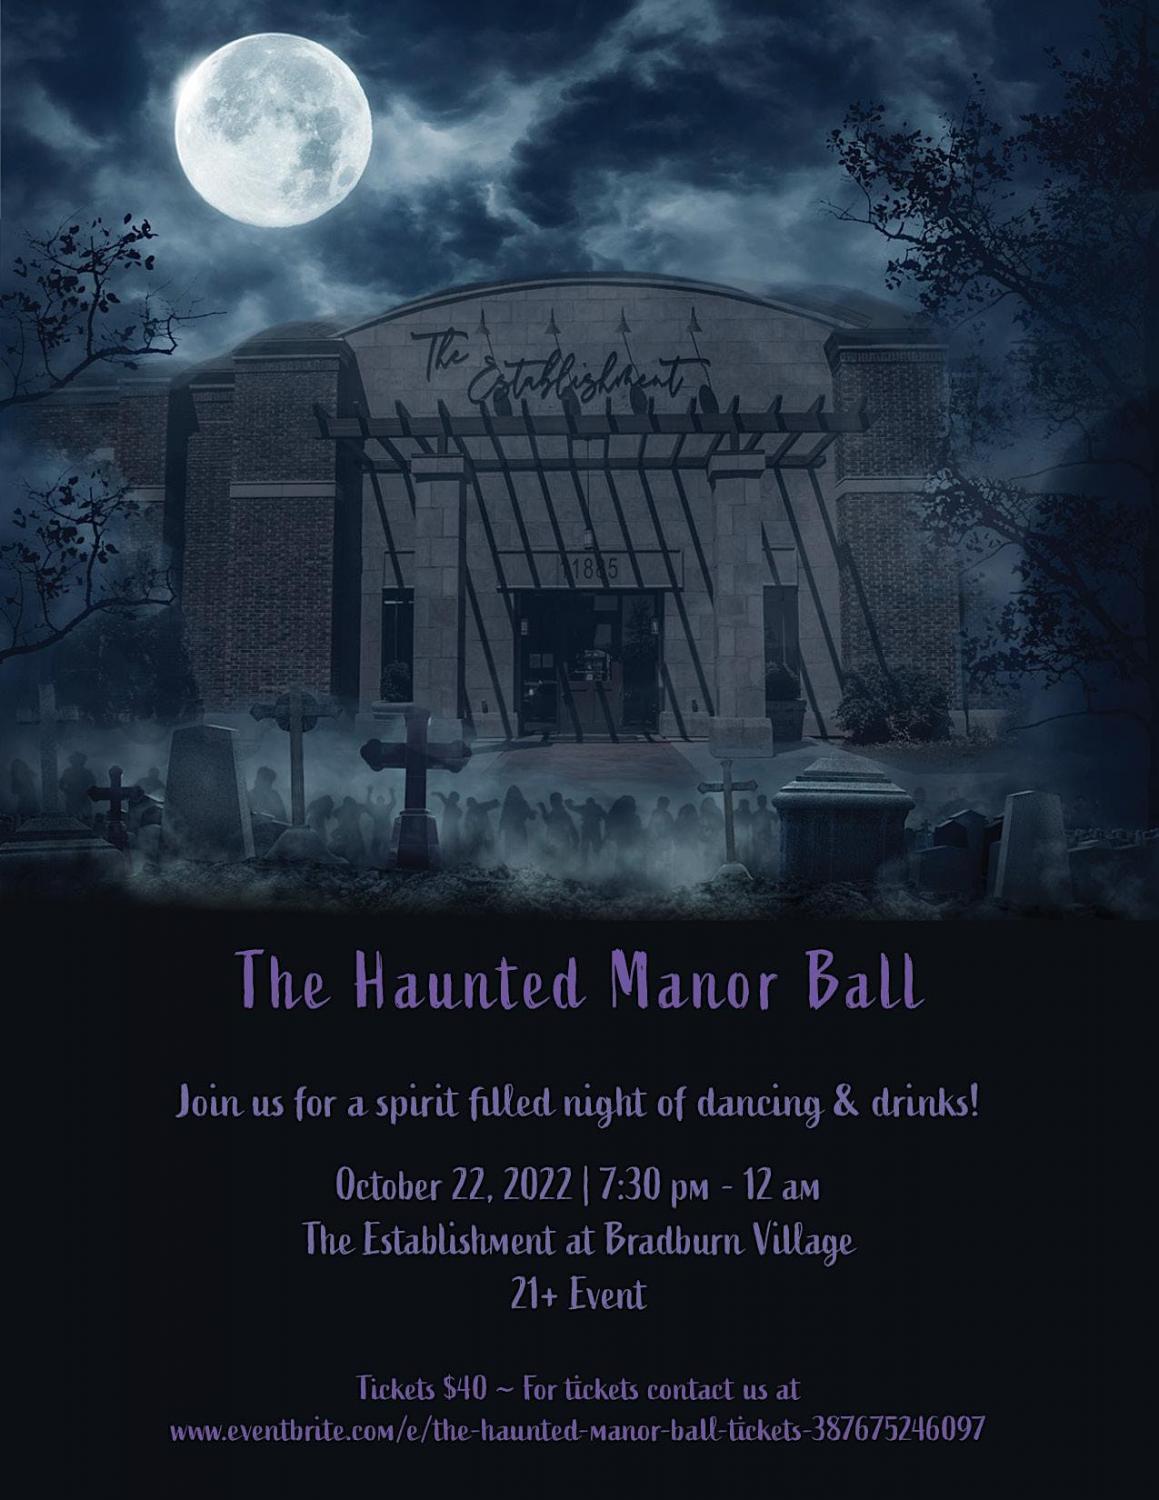 The Haunted Manor Ball
Sat Oct 22, 7:00 PM - Sun Oct 23, 7:00 PM
in 3 days